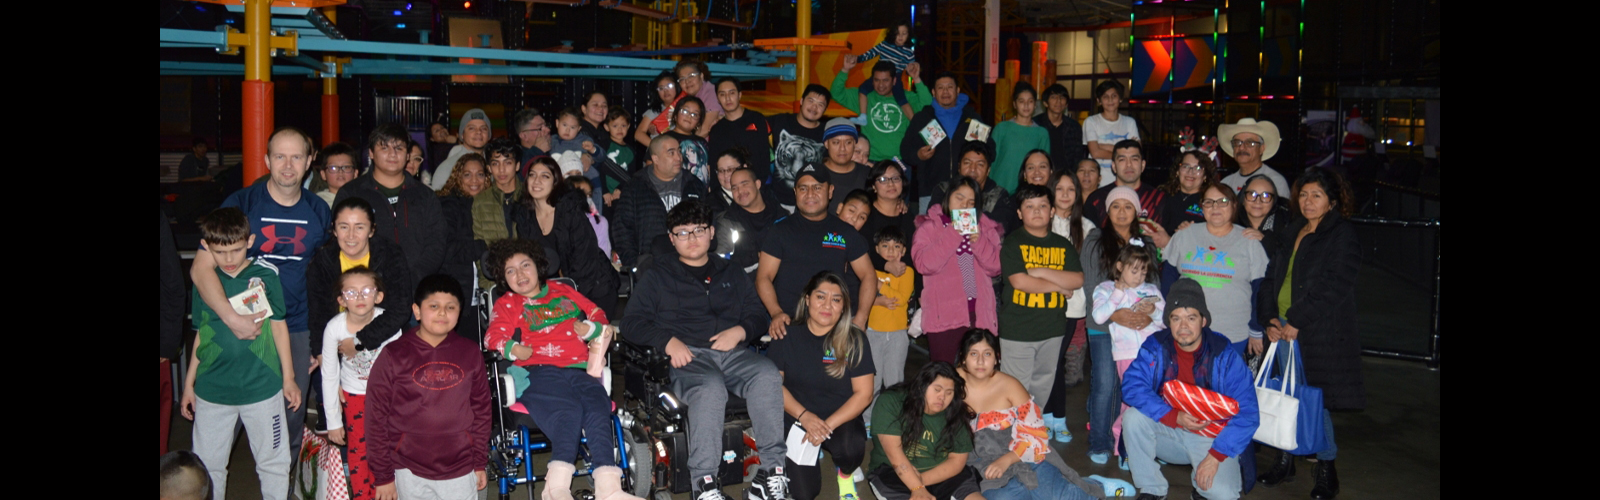 Christmas activity by Padres e Hijos en Acción for kids with disabilities and their families